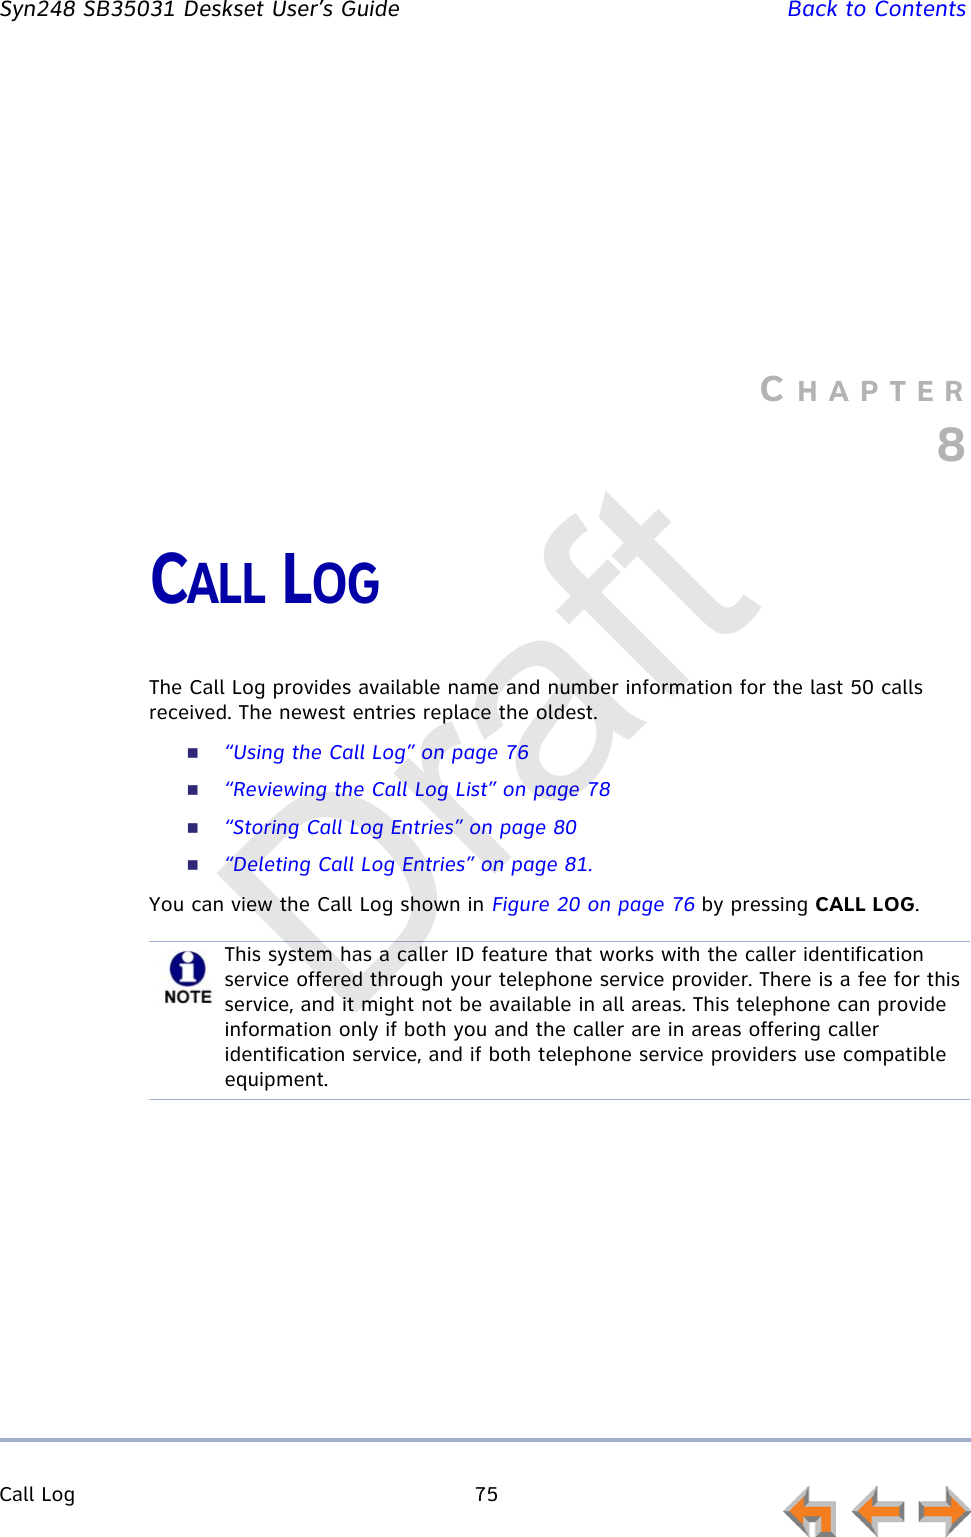 Call Log 75         Syn248 SB35031 Deskset User’s Guide Back to ContentsCHAPTER8CALL LOGThe Call Log provides available name and number information for the last 50 calls received. The newest entries replace the oldest.“Using the Call Log” on page 76“Reviewing the Call Log List” on page 78“Storing Call Log Entries” on page 80“Deleting Call Log Entries” on page 81.You can view the Call Log shown in Figure 20 on page 76 by pressing CALL LOG.This system has a caller ID feature that works with the caller identification service offered through your telephone service provider. There is a fee for this service, and it might not be available in all areas. This telephone can provide information only if both you and the caller are in areas offering caller identification service, and if both telephone service providers use compatible equipment.Draft